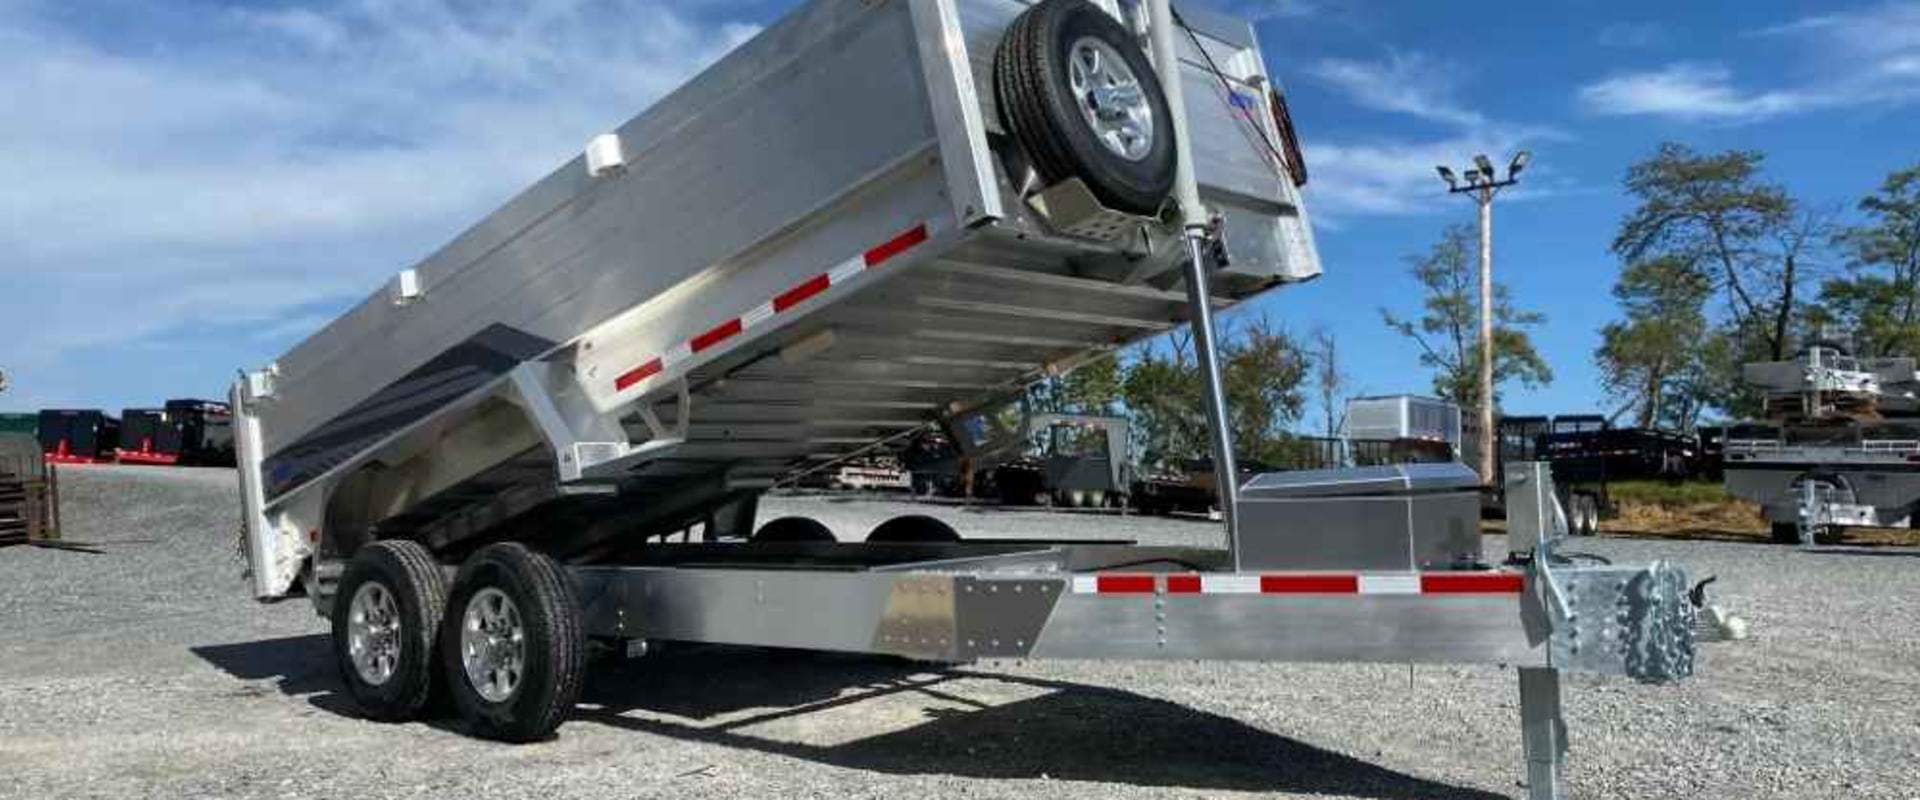 Truck Rental And Trailer Financing In Hattiesburg, MS: How To Get The Best Of Both Worlds